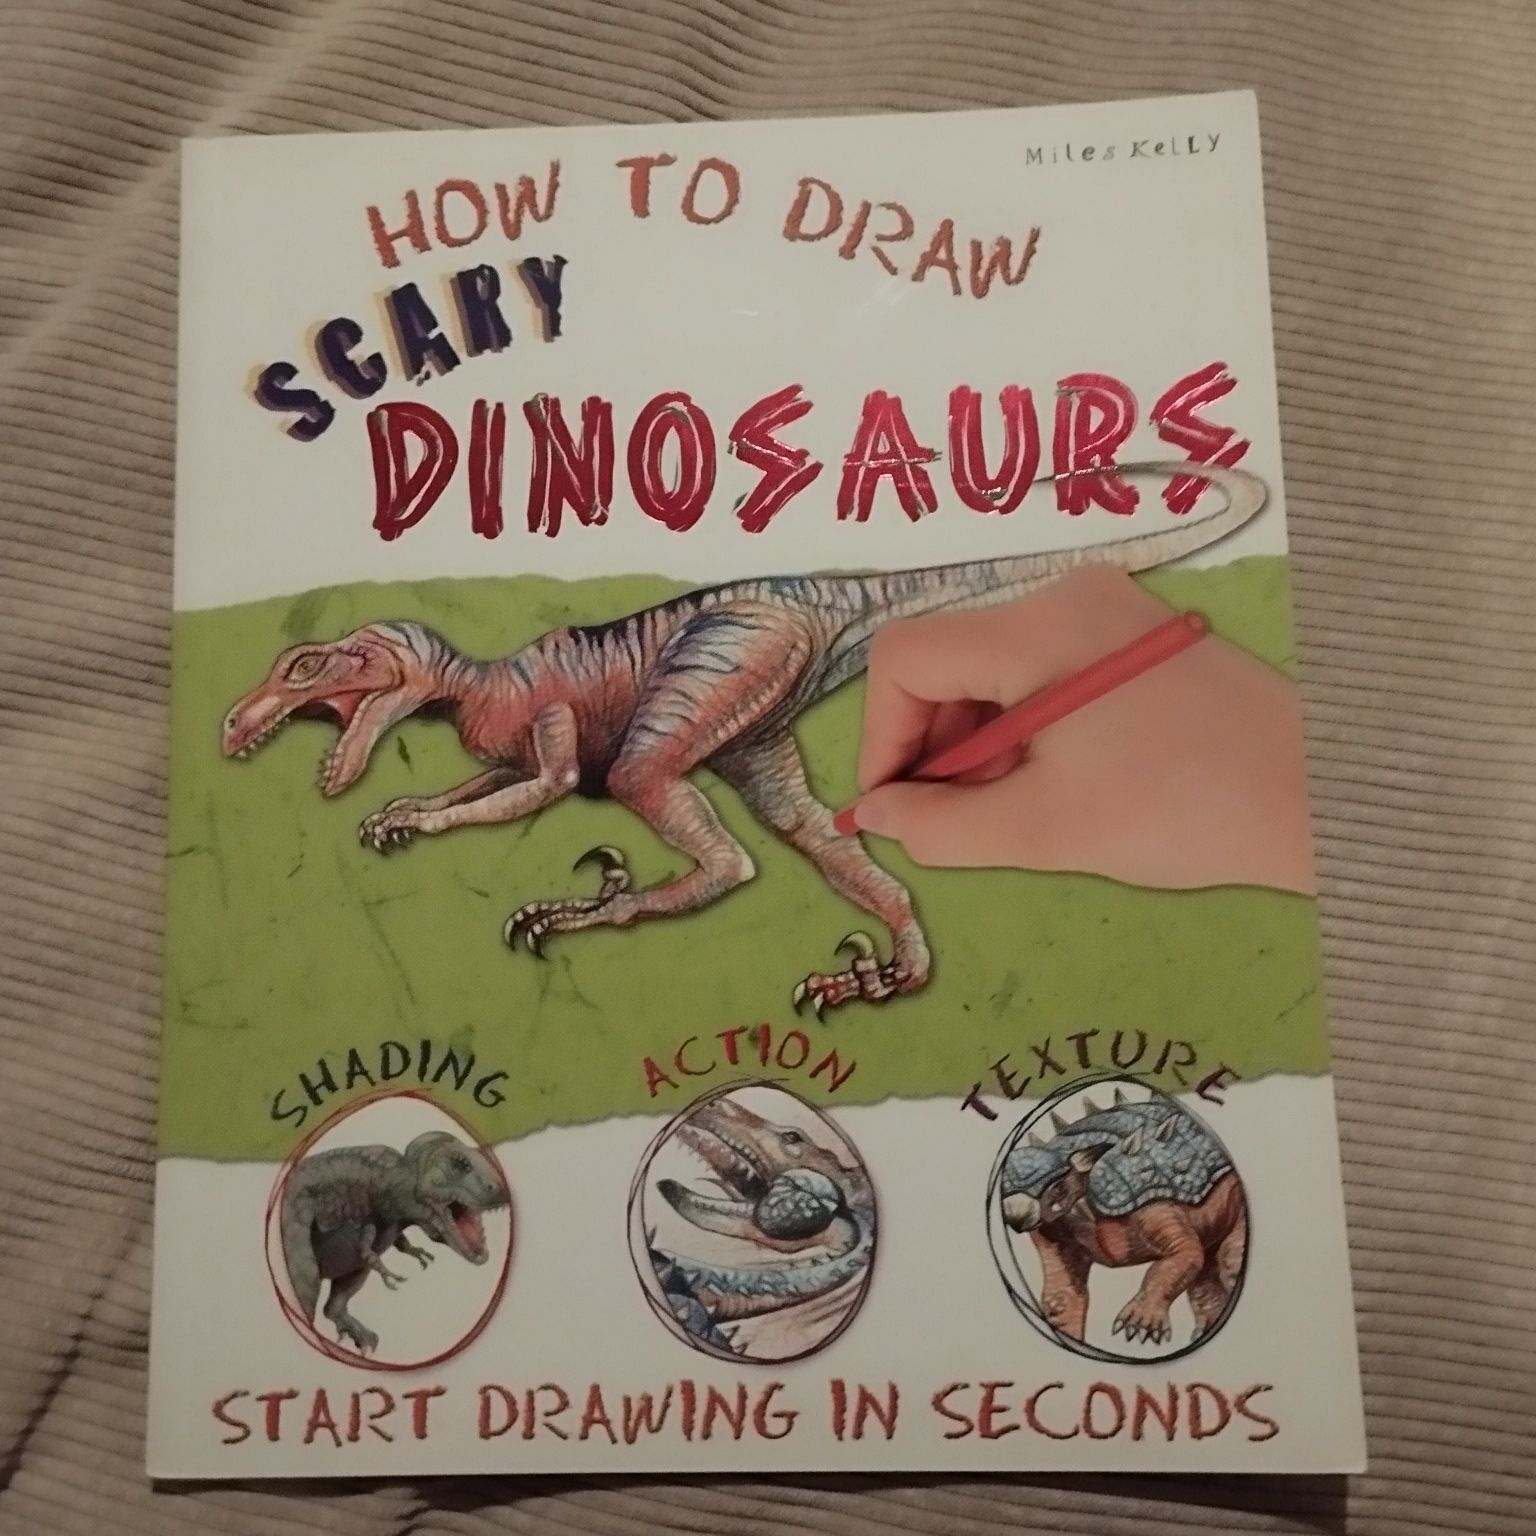 How to draw scary dinosaurs